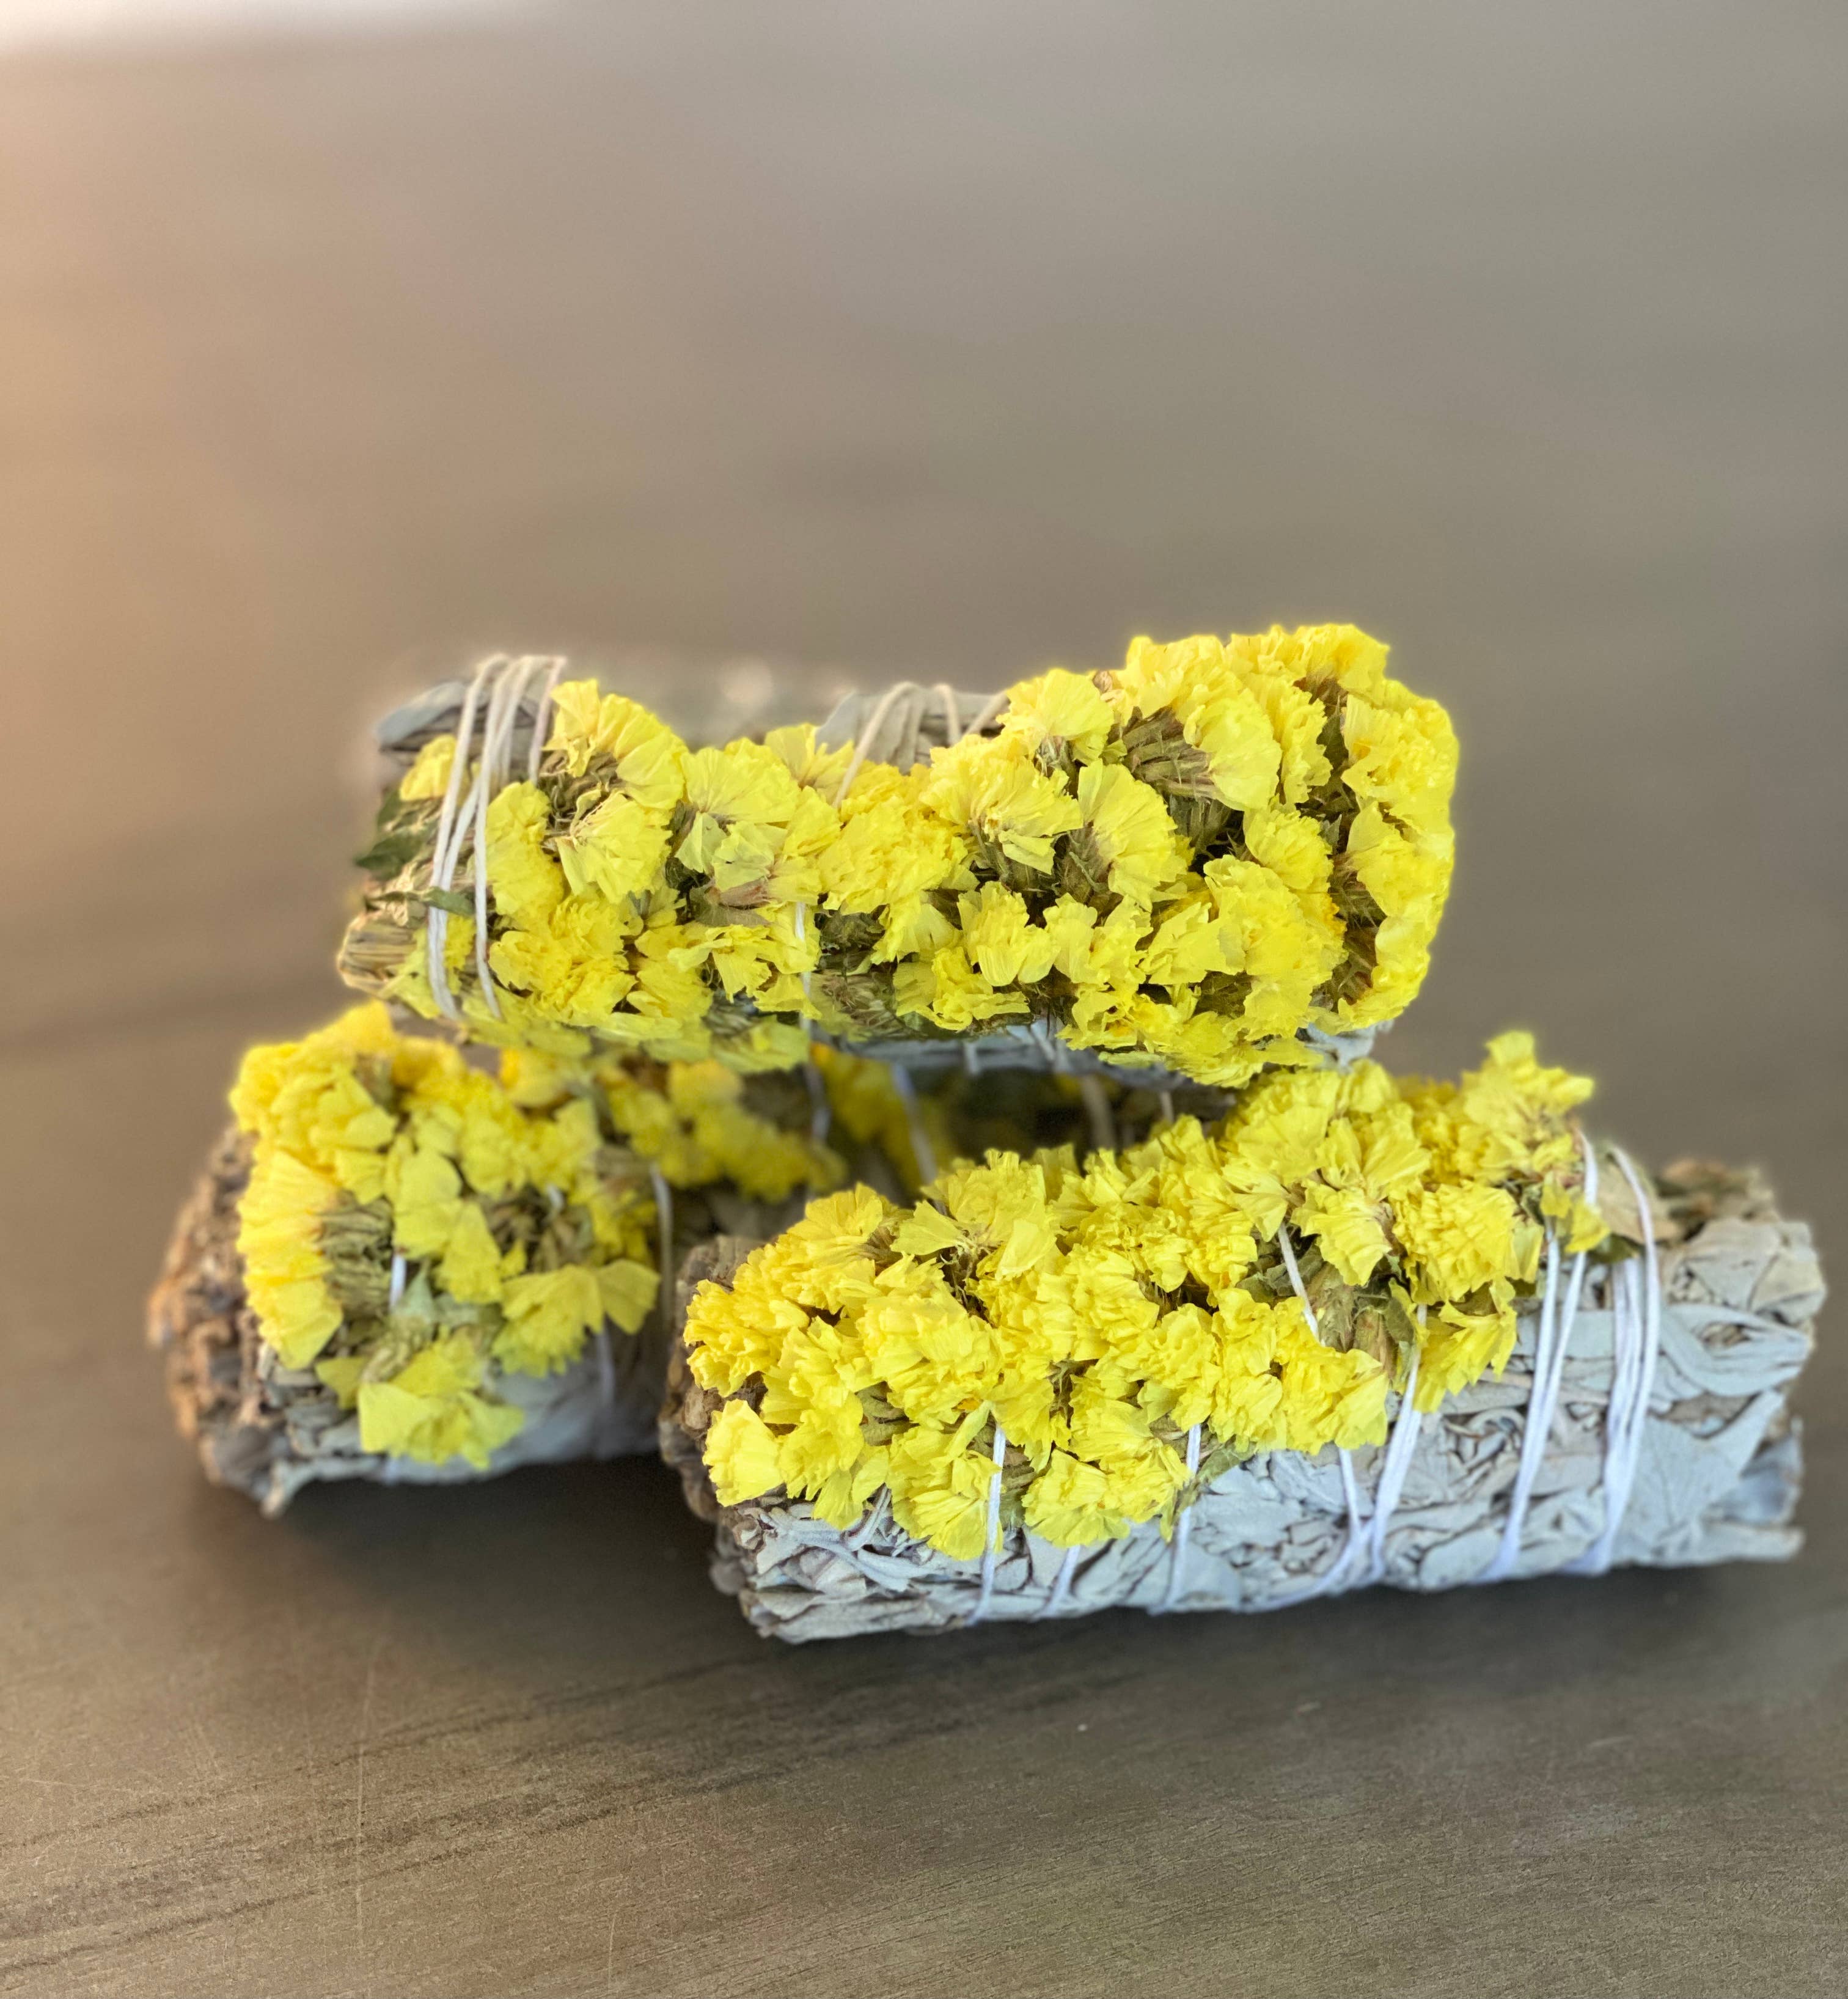 White Sage Smudge Stick with Yellow Flowers